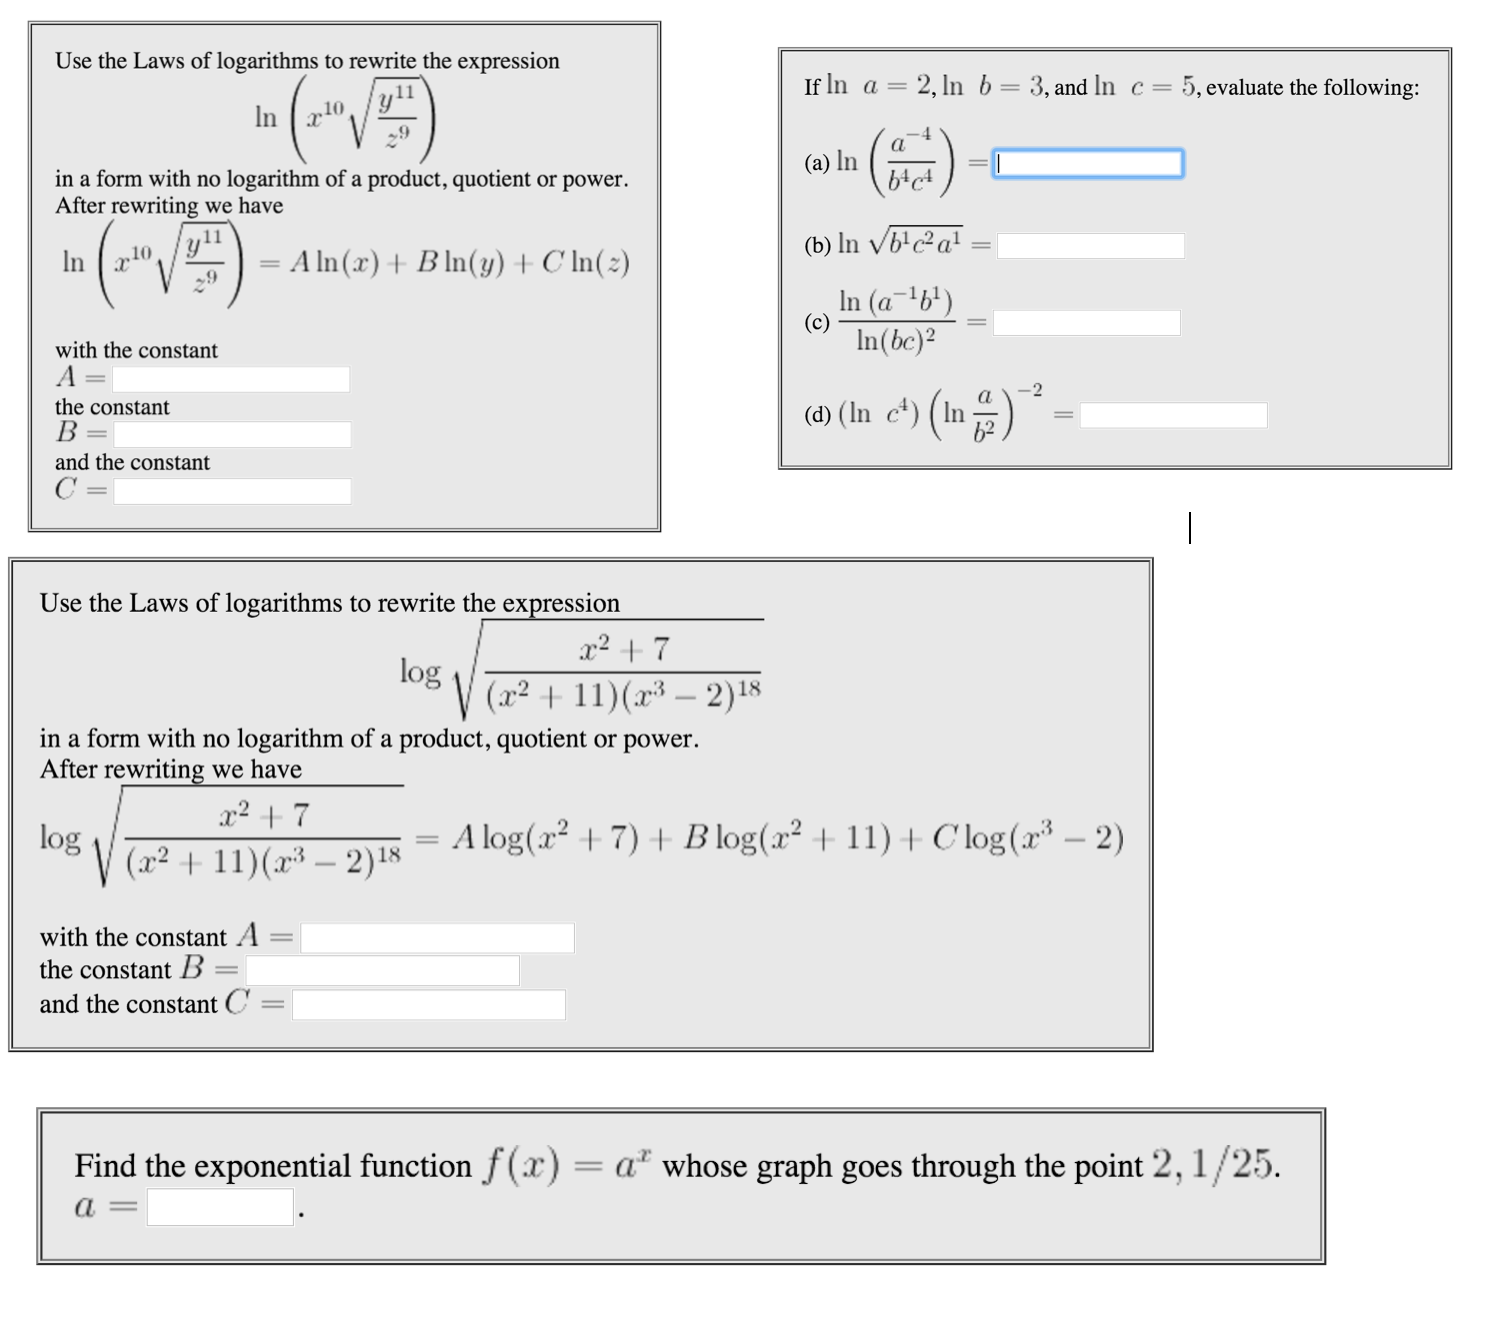 solved-use-the-laws-of-logarithms-to-rewrite-the-expression-chegg